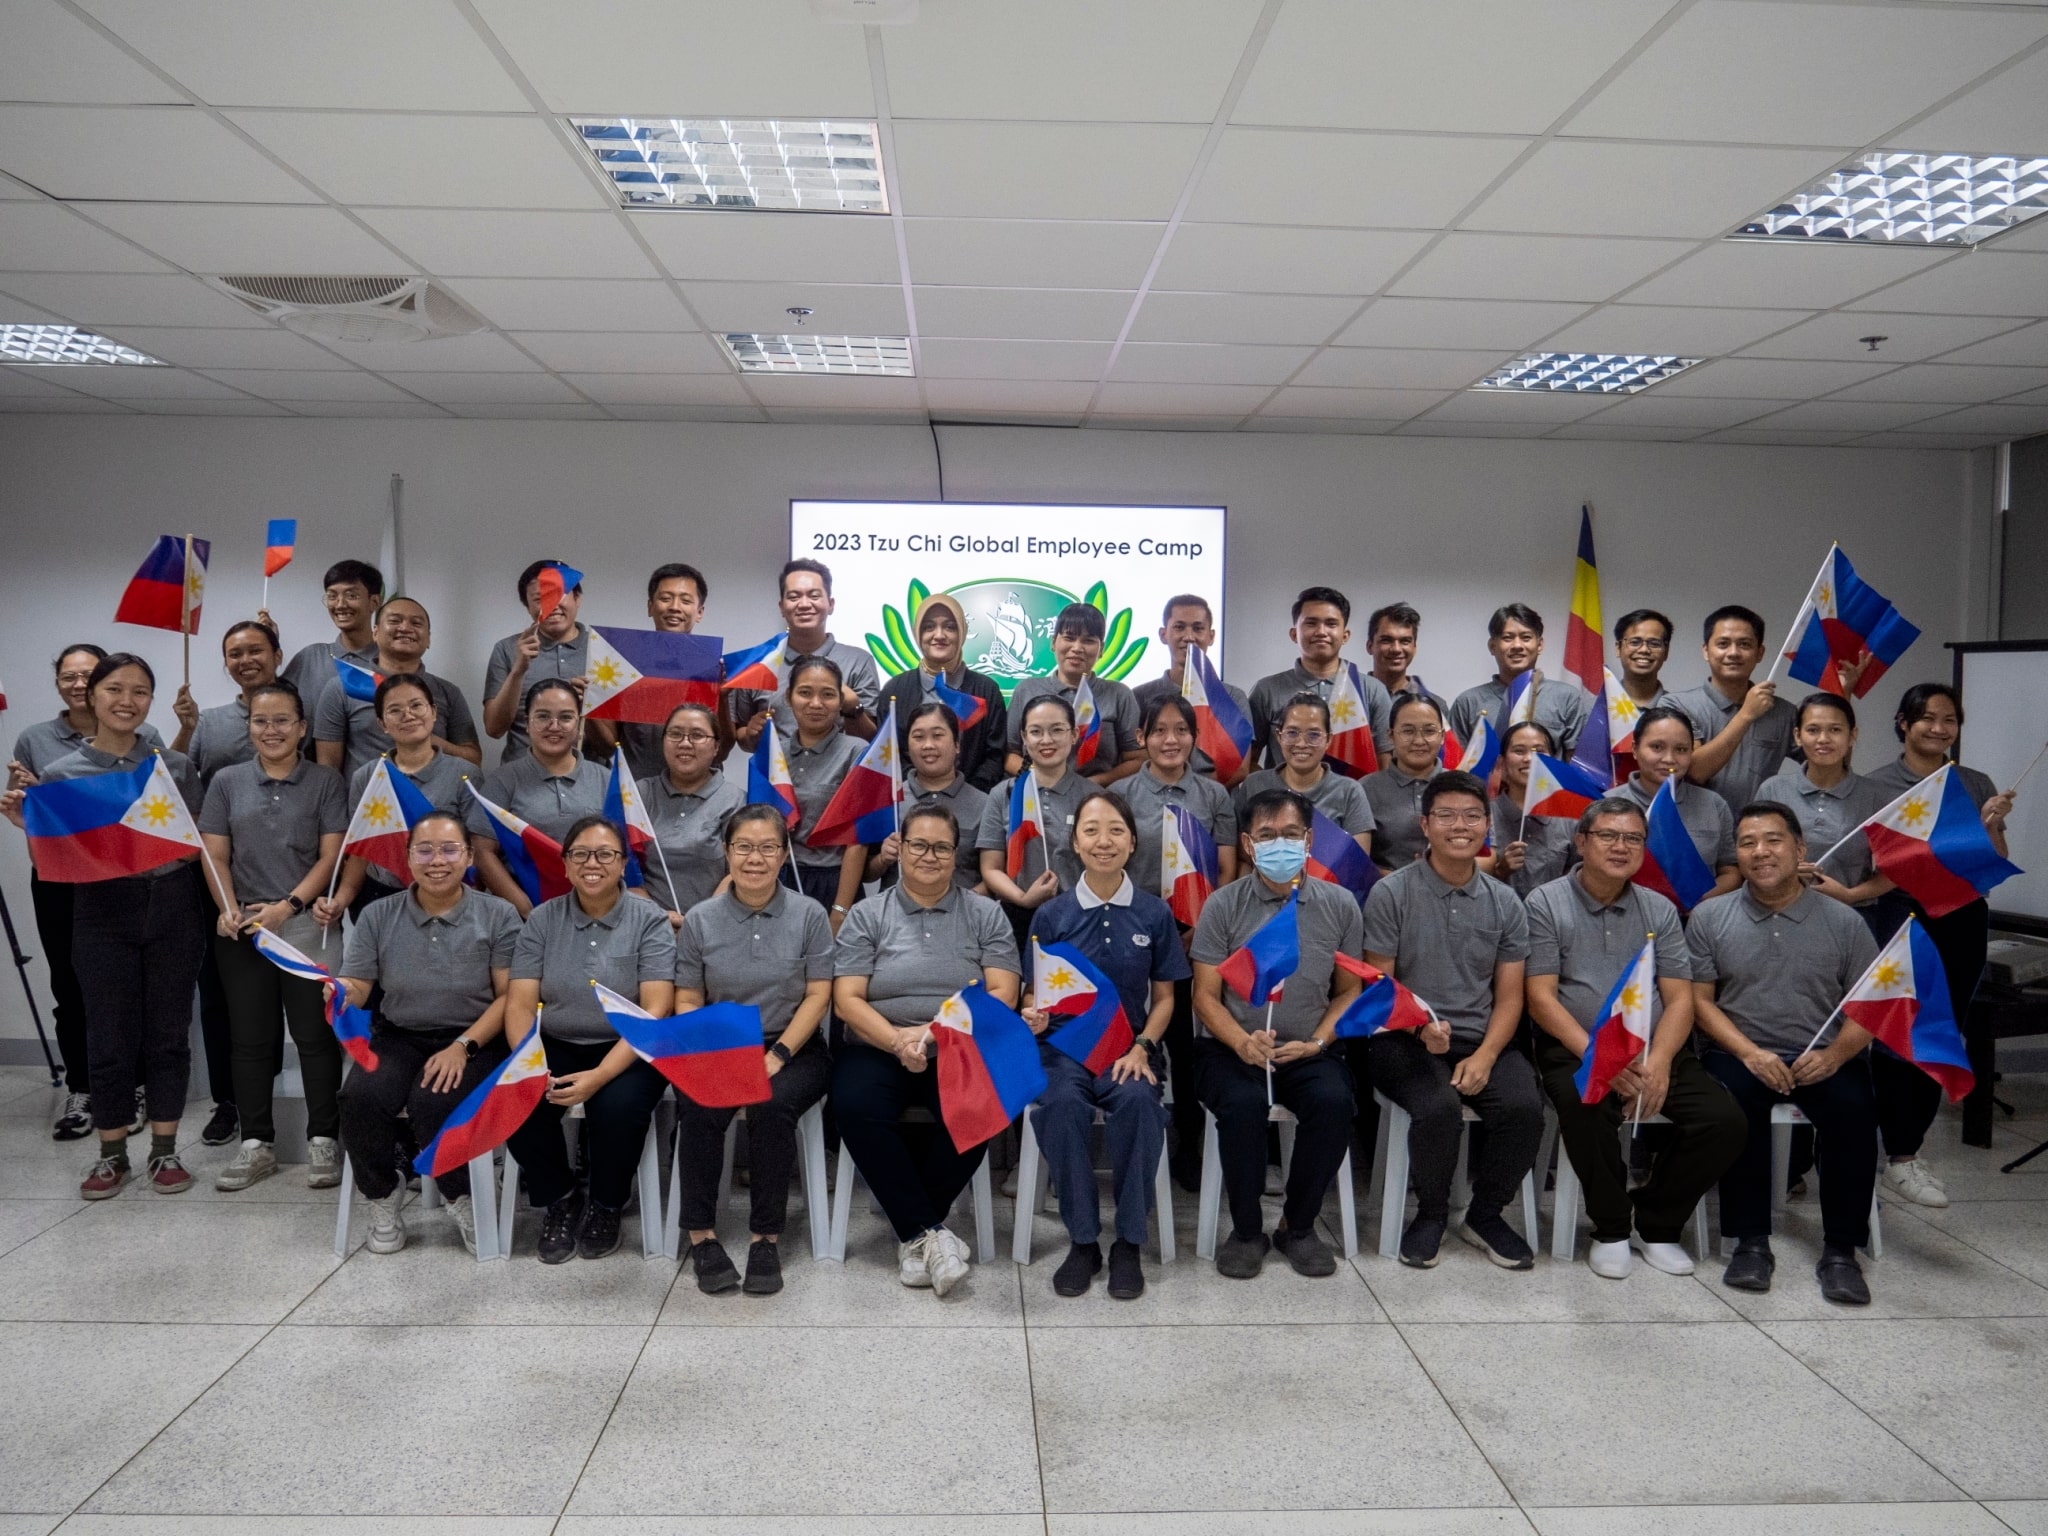 Tzu Chi Philippines employees join in the 2023 Tzu Chi Global Employee Camp on September 22-24 at the Buddhist Tzu Chi Campus in Sta. Mesa, Manila. 【Photo by Matt Serrano】